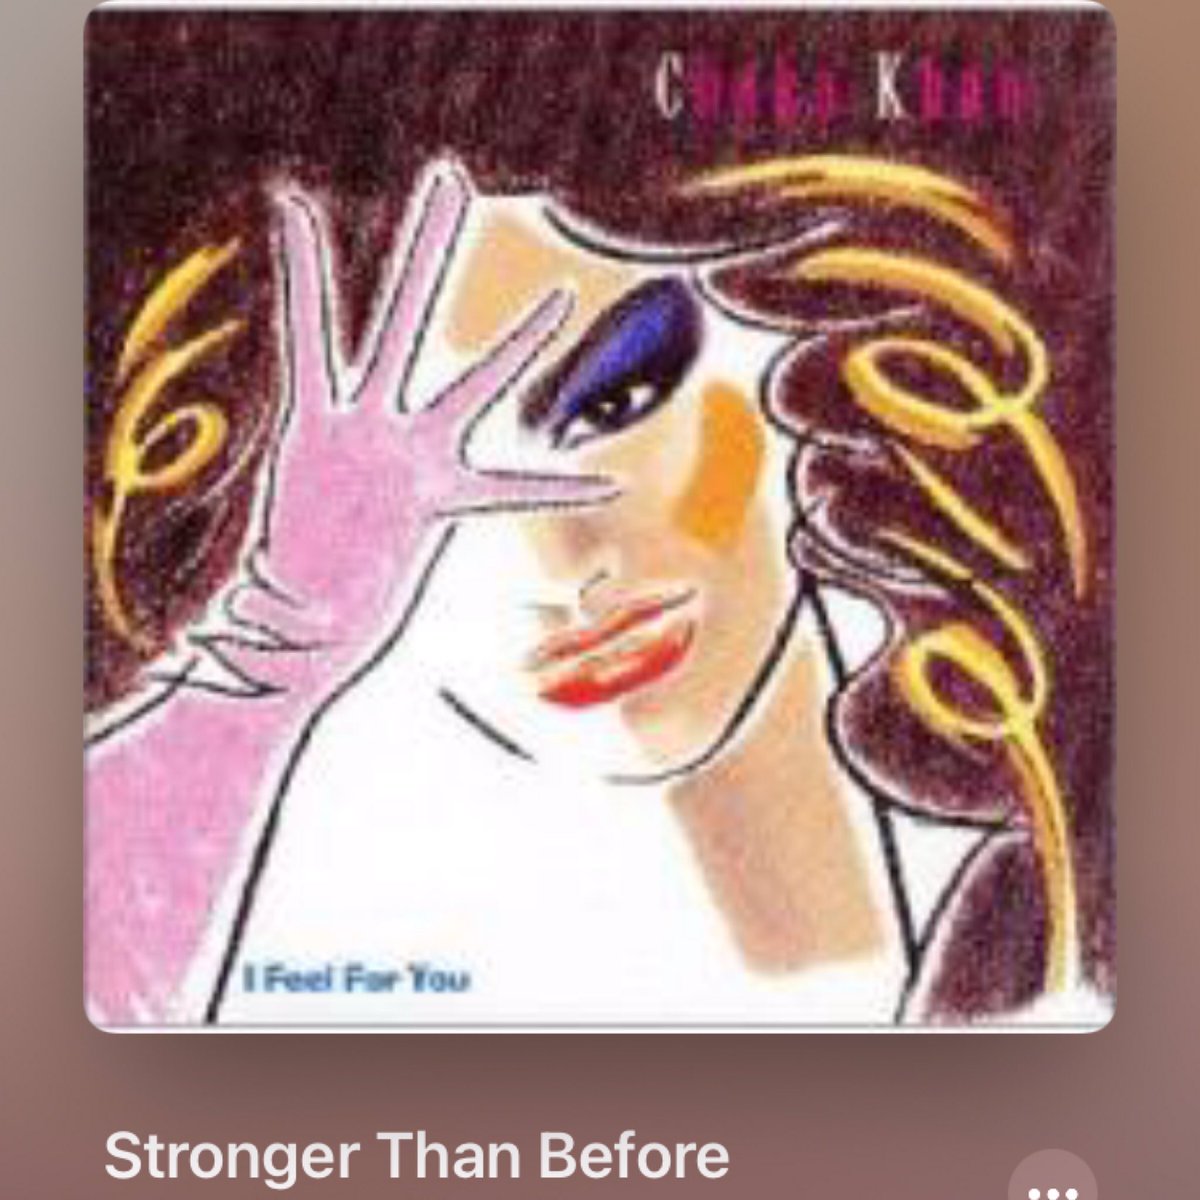 #NowPlaying
🎵 Stronger Than Before
by 🎵 Chaka Khan
from 🎵 I Feel for You
#arifmardin 
#ChakaKhan #シャカカーン
#BruceRoberts #BurtBacharach #CaroleBayerSager
#80s #BCM #ブラコン #bacharachsongbook